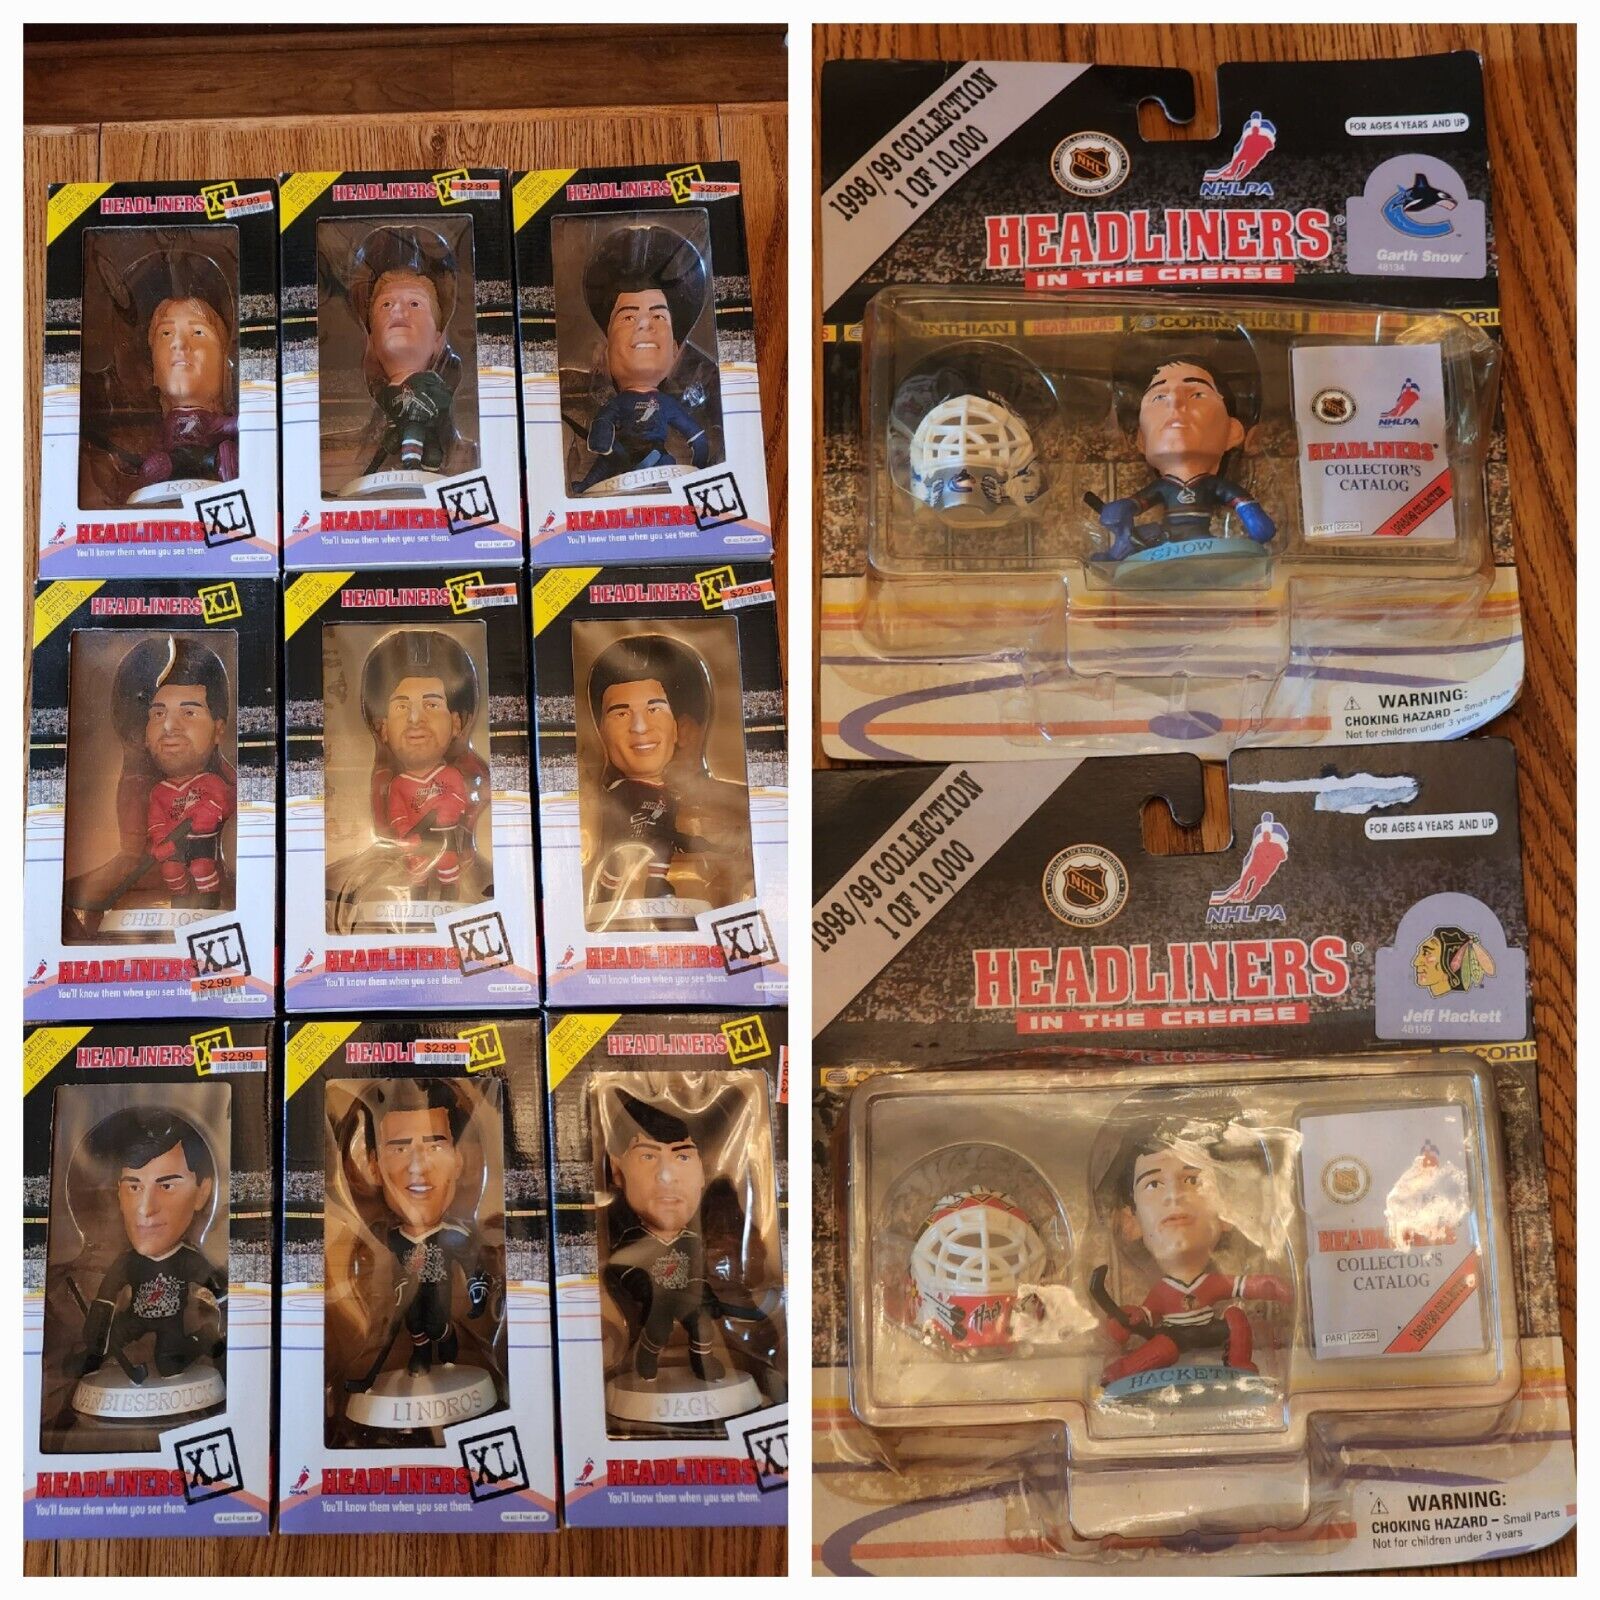 Lot (11) Action figures Hockey Headliners XL 1998 Players NHLPA New in box